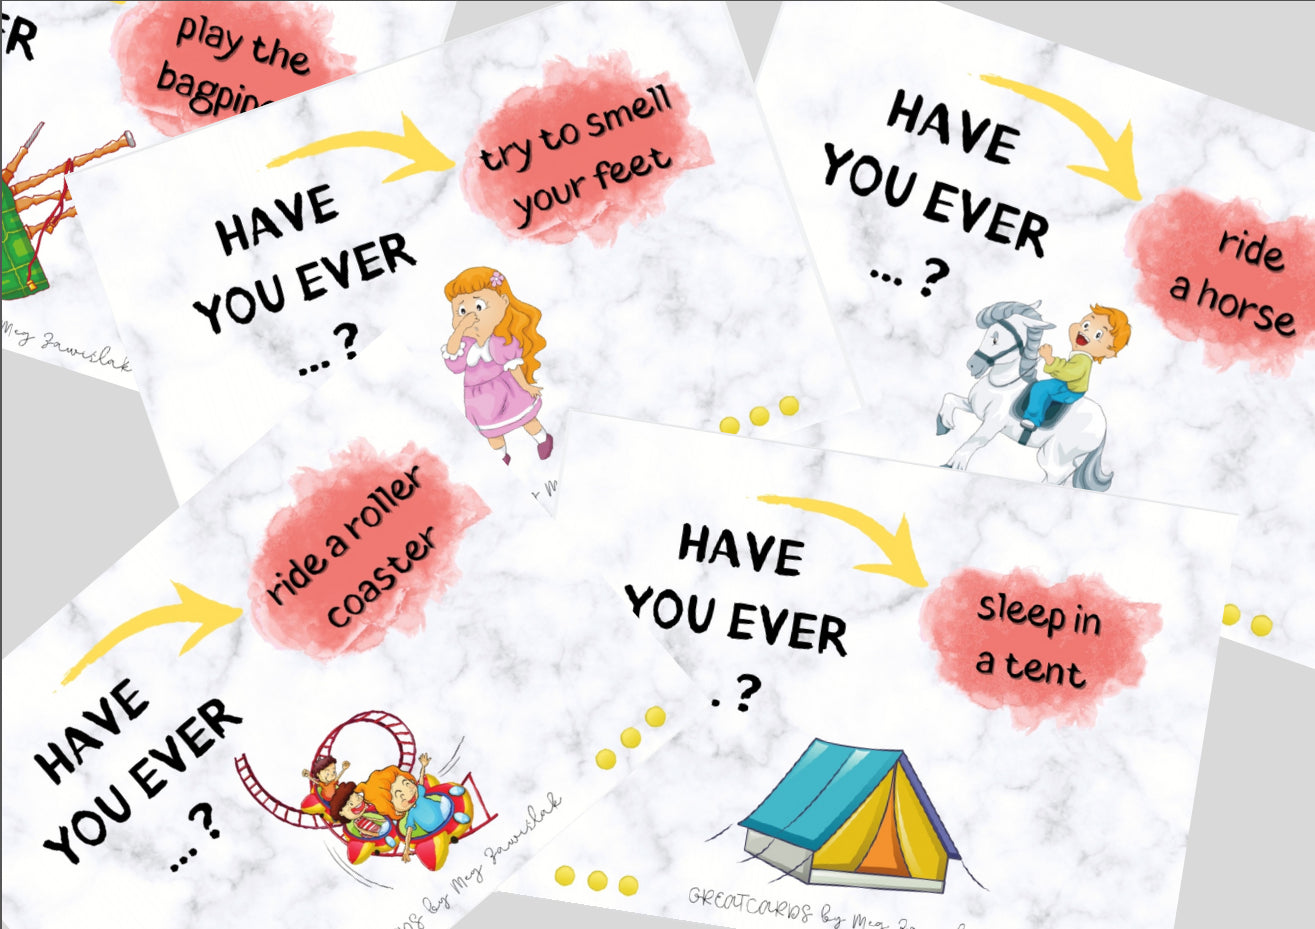 Greatcards - HAVE YOU EVER ... ? PRESENT PERFECT for life experiences